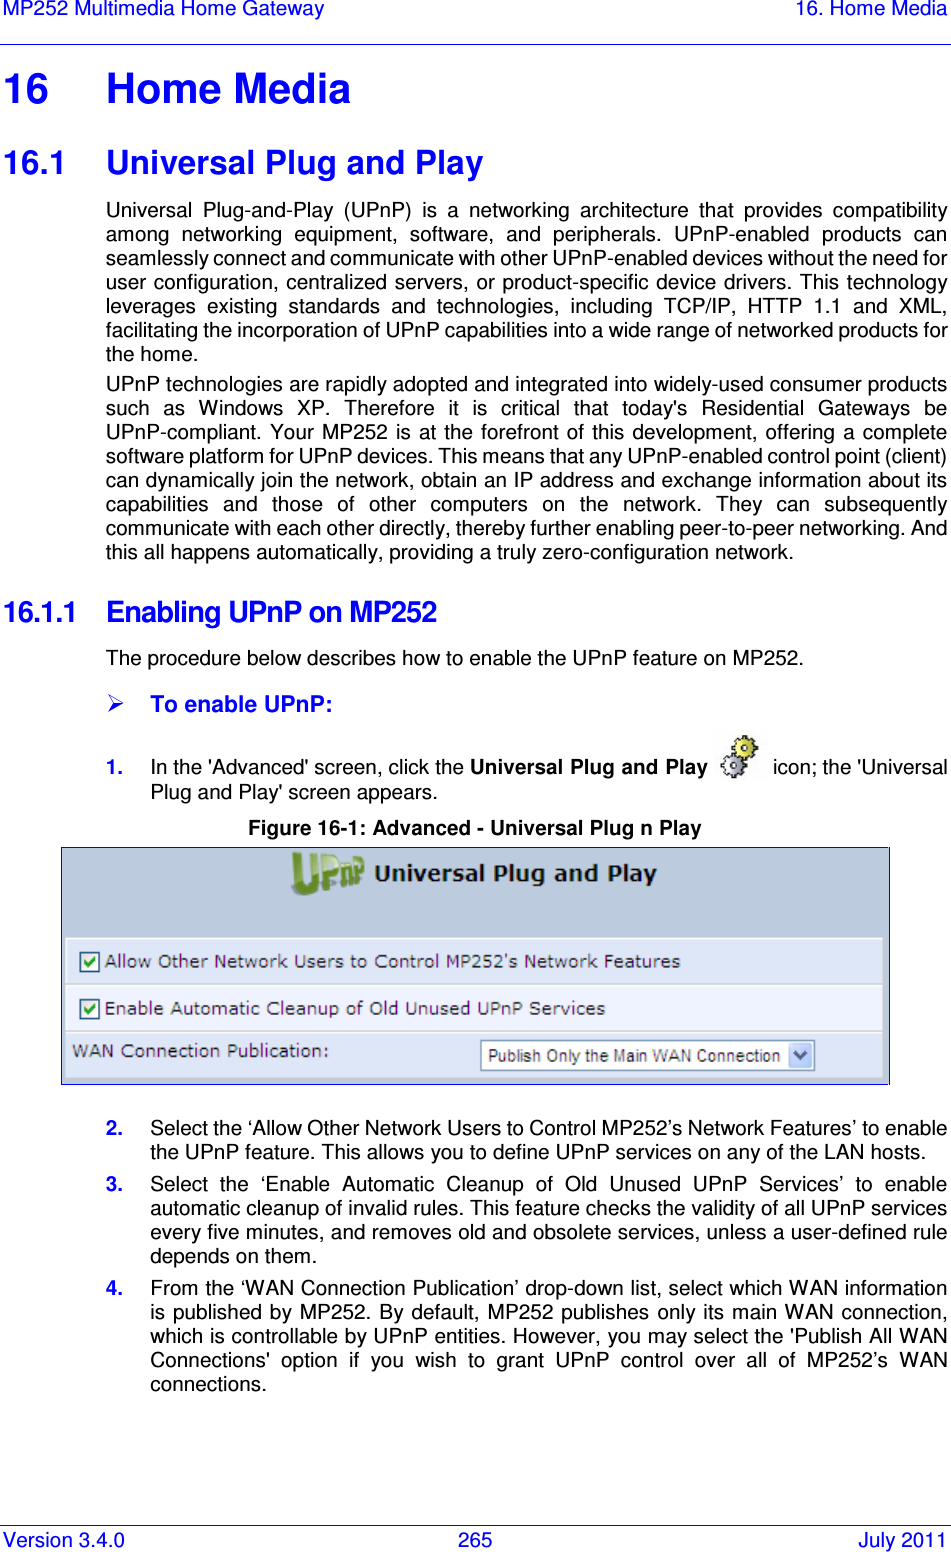 Version 3.4.0  265  July 2011 MP252 Multimedia Home Gateway  16. Home Media  16  Home Media 16.1  Universal Plug and Play Universal  Plug-and-Play  (UPnP)  is  a  networking  architecture  that  provides  compatibility among  networking  equipment,  software,  and  peripherals.  UPnP-enabled  products  can seamlessly connect and communicate with other UPnP-enabled devices without the need for user configuration, centralized servers, or product-specific device drivers. This technology leverages  existing  standards  and  technologies,  including  TCP/IP,  HTTP  1.1  and  XML, facilitating the incorporation of UPnP capabilities into a wide range of networked products for the home.  UPnP technologies are rapidly adopted and integrated into widely-used consumer products such  as  Windows  XP.  Therefore  it  is  critical  that  today&apos;s  Residential  Gateways  be UPnP-compliant. Your  MP252 is at  the  forefront of this  development,  offering  a  complete software platform for UPnP devices. This means that any UPnP-enabled control point (client) can dynamically join the network, obtain an IP address and exchange information about its capabilities  and  those  of  other  computers  on  the  network.  They  can  subsequently communicate with each other directly, thereby further enabling peer-to-peer networking. And this all happens automatically, providing a truly zero-configuration network. 16.1.1  Enabling UPnP on MP252 The procedure below describes how to enable the UPnP feature on MP252.  To enable UPnP: 1.  In the &apos;Advanced&apos; screen, click the Universal Plug and Play   icon; the &apos;Universal Plug and Play&apos; screen appears. Figure 16-1: Advanced - Universal Plug n Play  2.  Select the ‘Allow Other Network Users to Control MP252’s Network Features’ to enable the UPnP feature. This allows you to define UPnP services on any of the LAN hosts. 3.  Select  the  ‘Enable  Automatic  Cleanup  of  Old  Unused  UPnP  Services’  to  enable automatic cleanup of invalid rules. This feature checks the validity of all UPnP services every five minutes, and removes old and obsolete services, unless a user-defined rule depends on them. 4.  From the ‘WAN Connection Publication’ drop-down list, select which WAN information is published by MP252. By default, MP252 publishes only its main WAN connection, which is controllable by UPnP entities. However, you may select the &apos;Publish All WAN Connections&apos;  option  if  you  wish  to  grant  UPnP  control  over  all  of  MP252’s  WAN connections.  